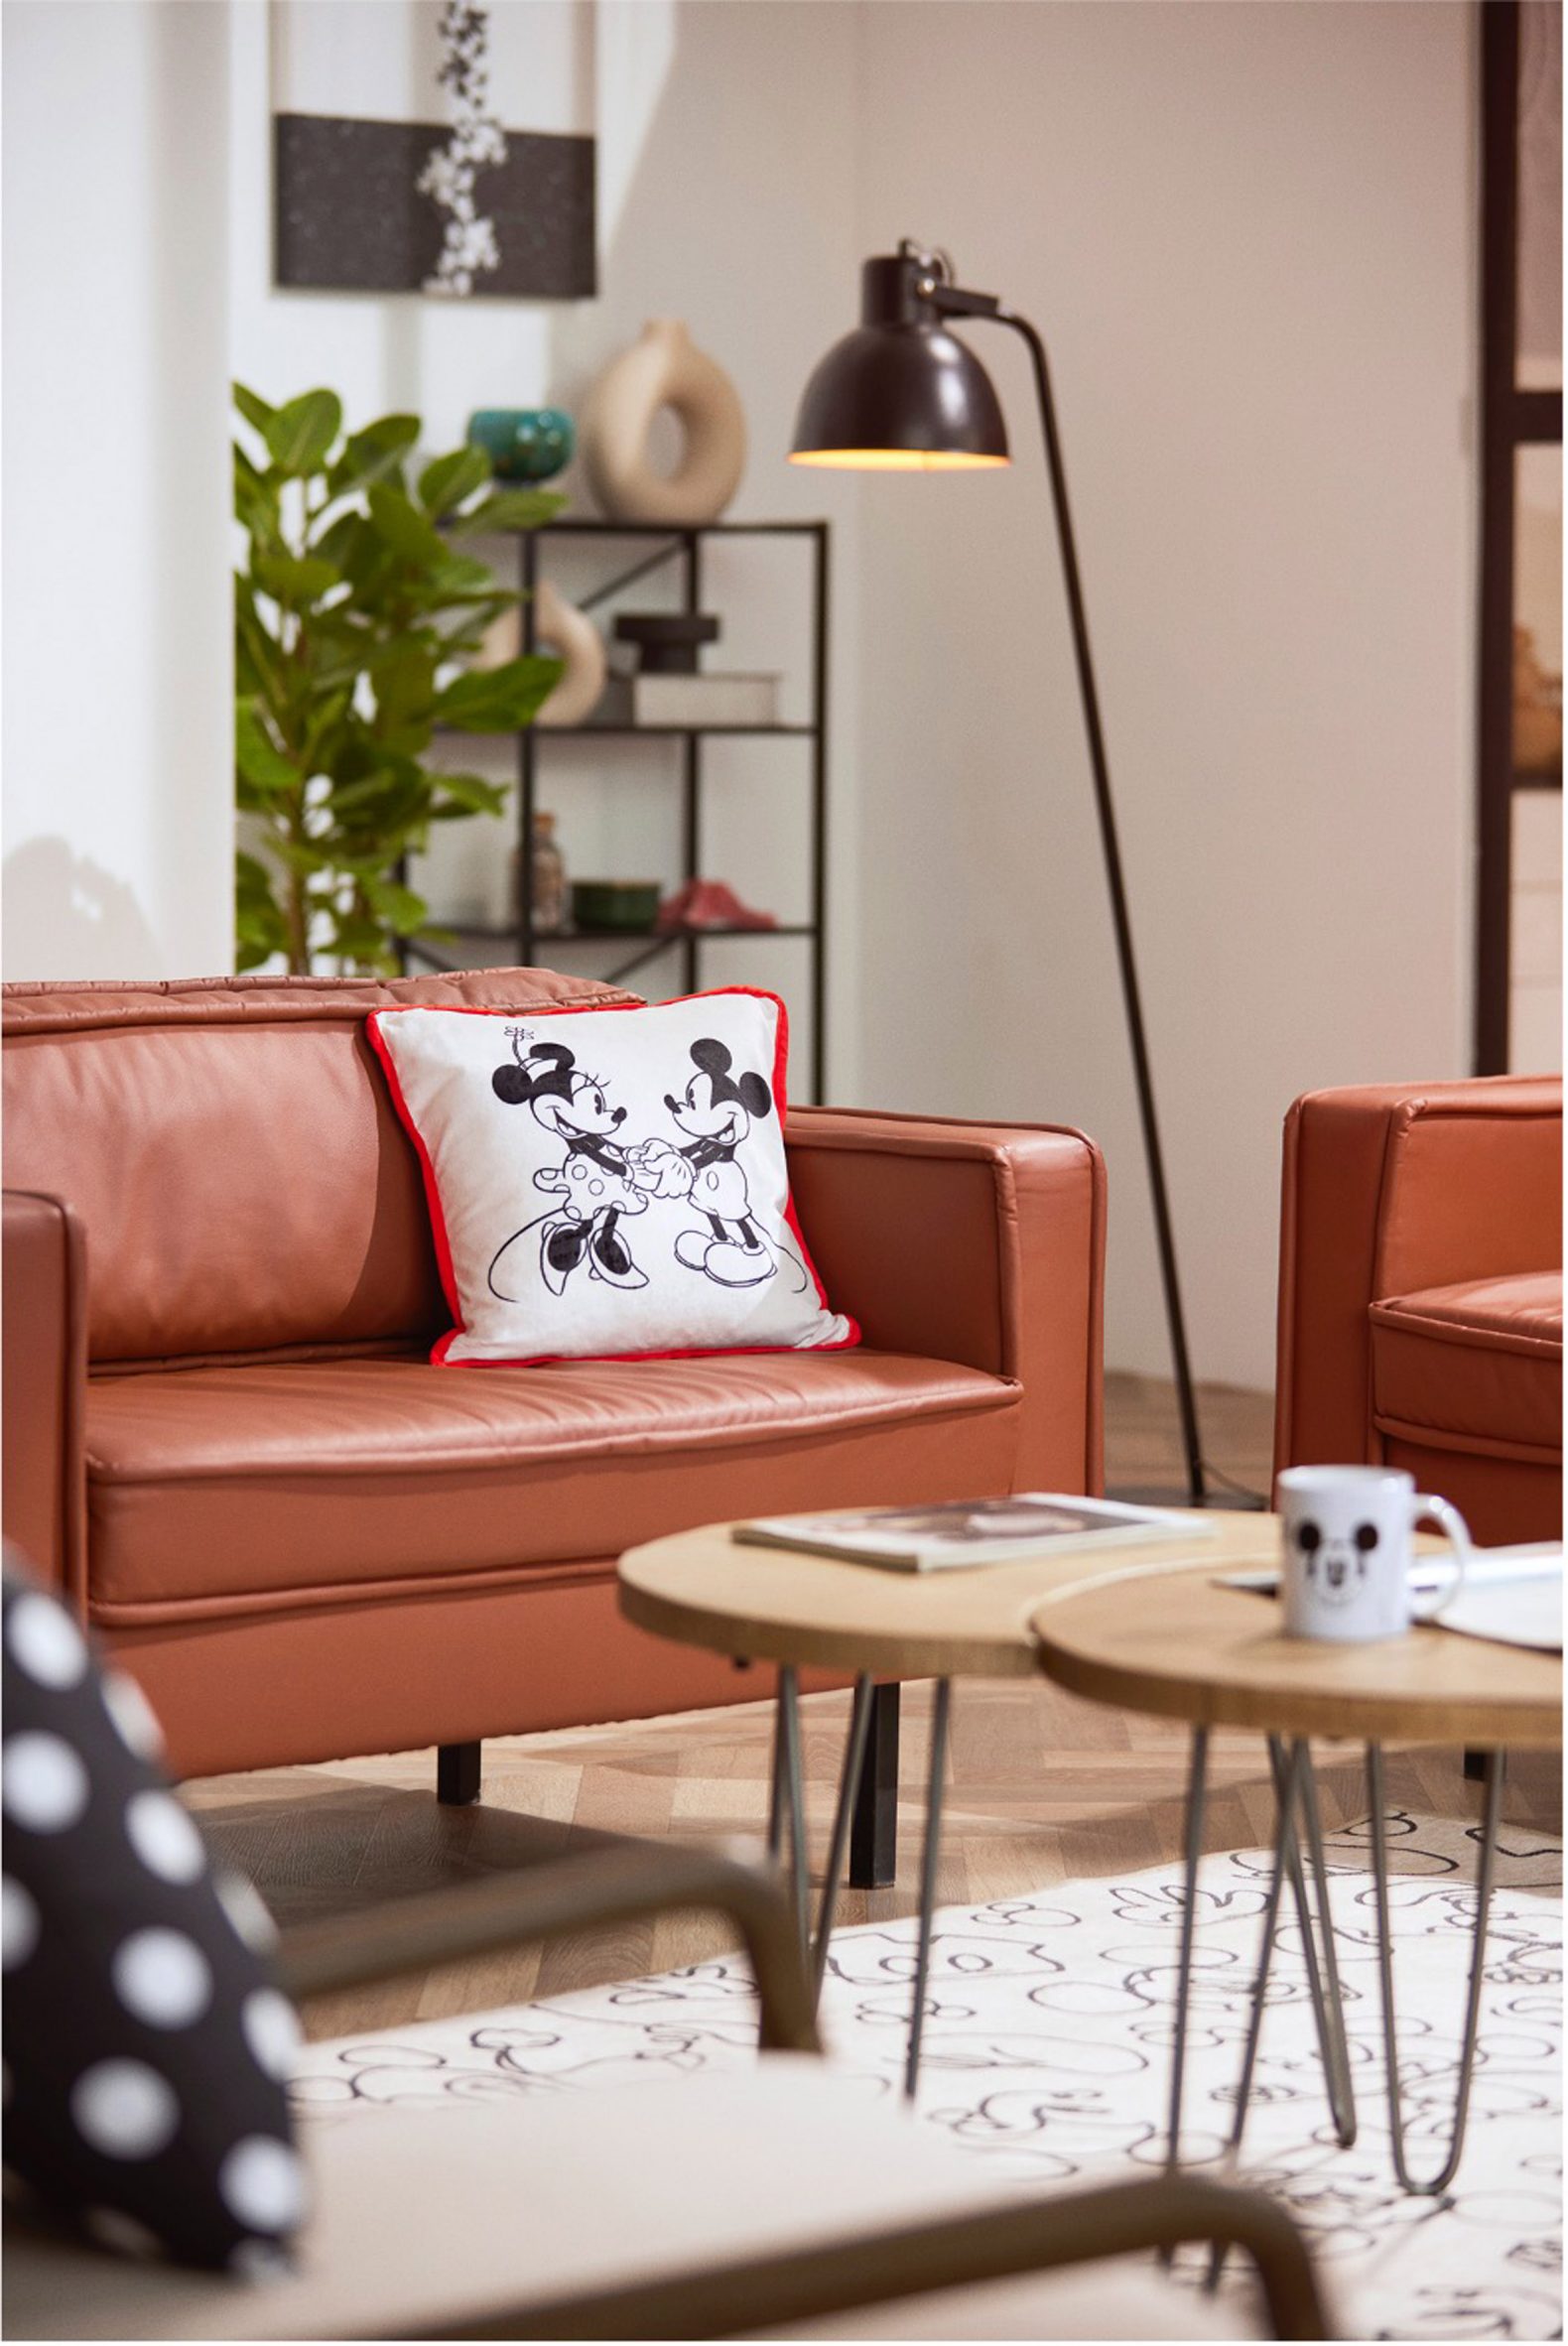 Disney moves into aspirational furniture with new brand Disney Home